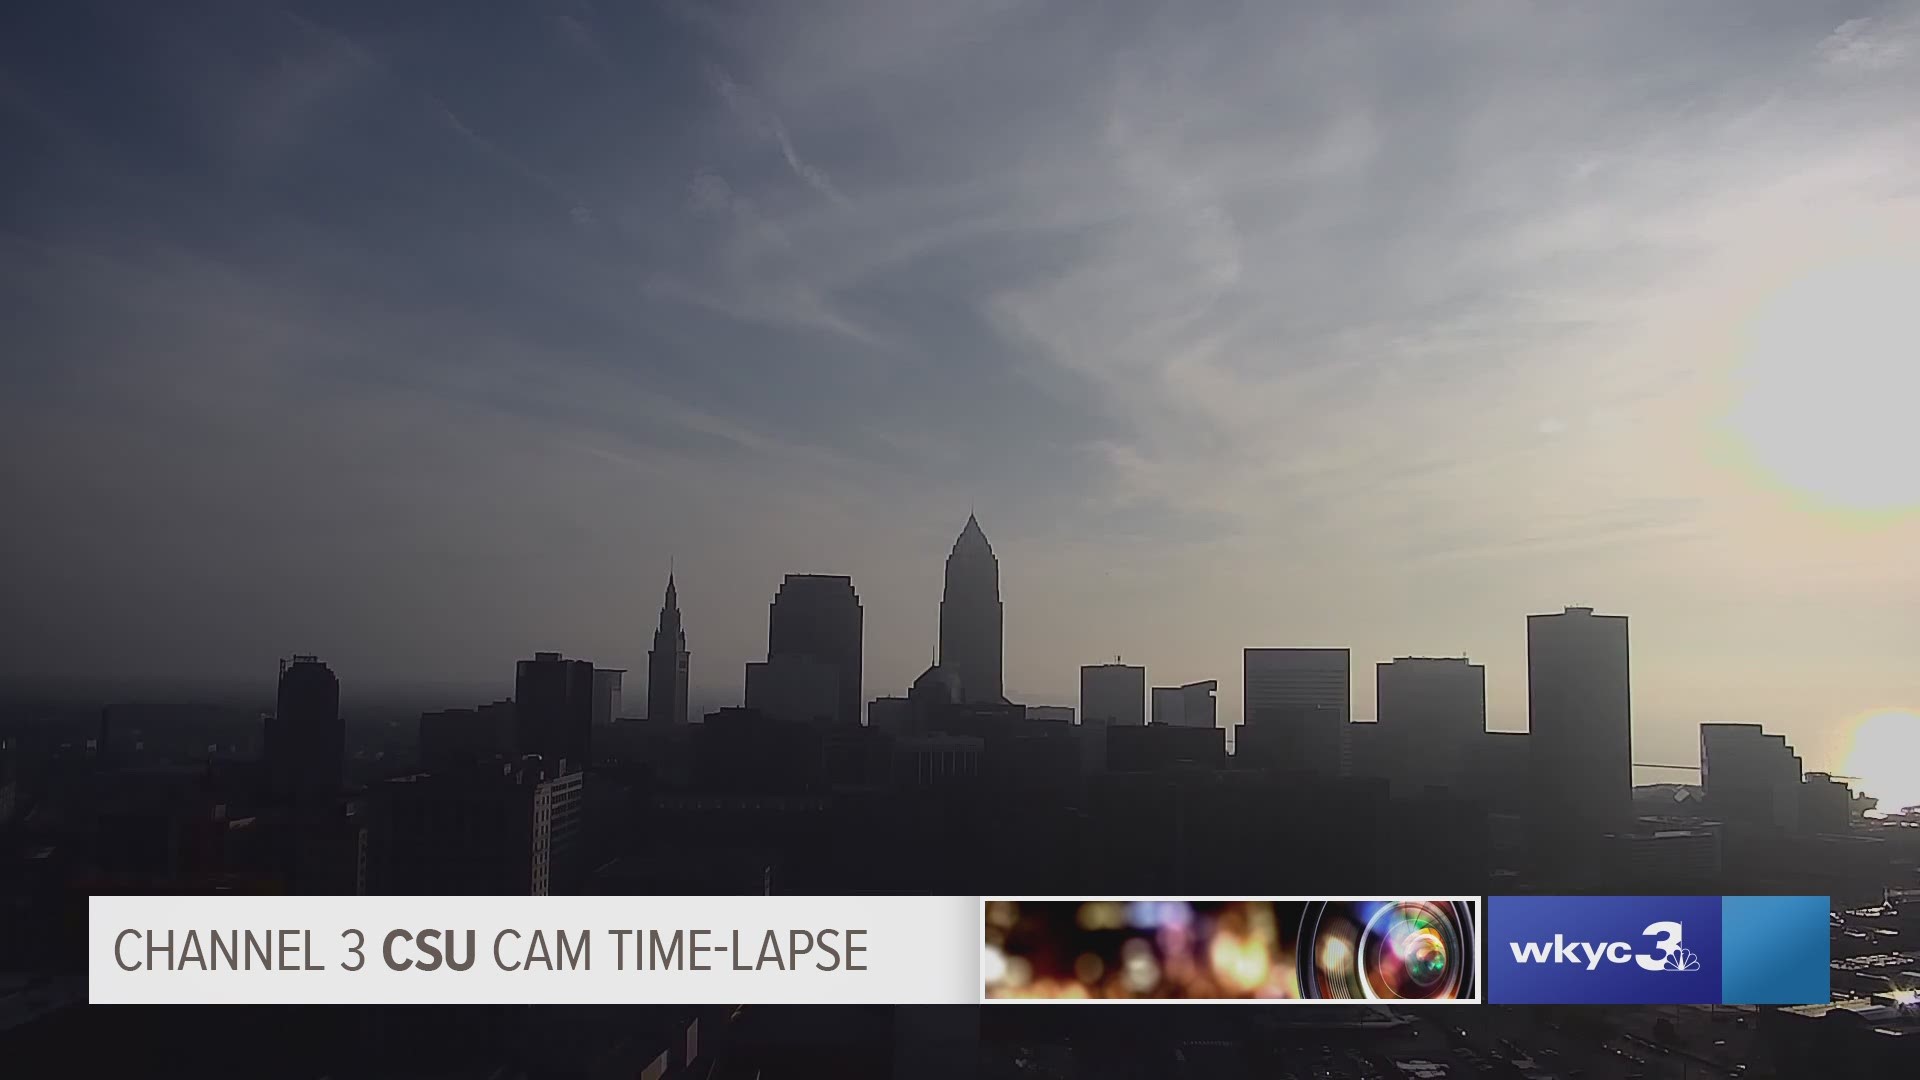 Take :30 seconds and enjoy Thursday evening's sunset across the Cleveland area from the Channel 3 CSU Cam for June 6, 2019. #3weather